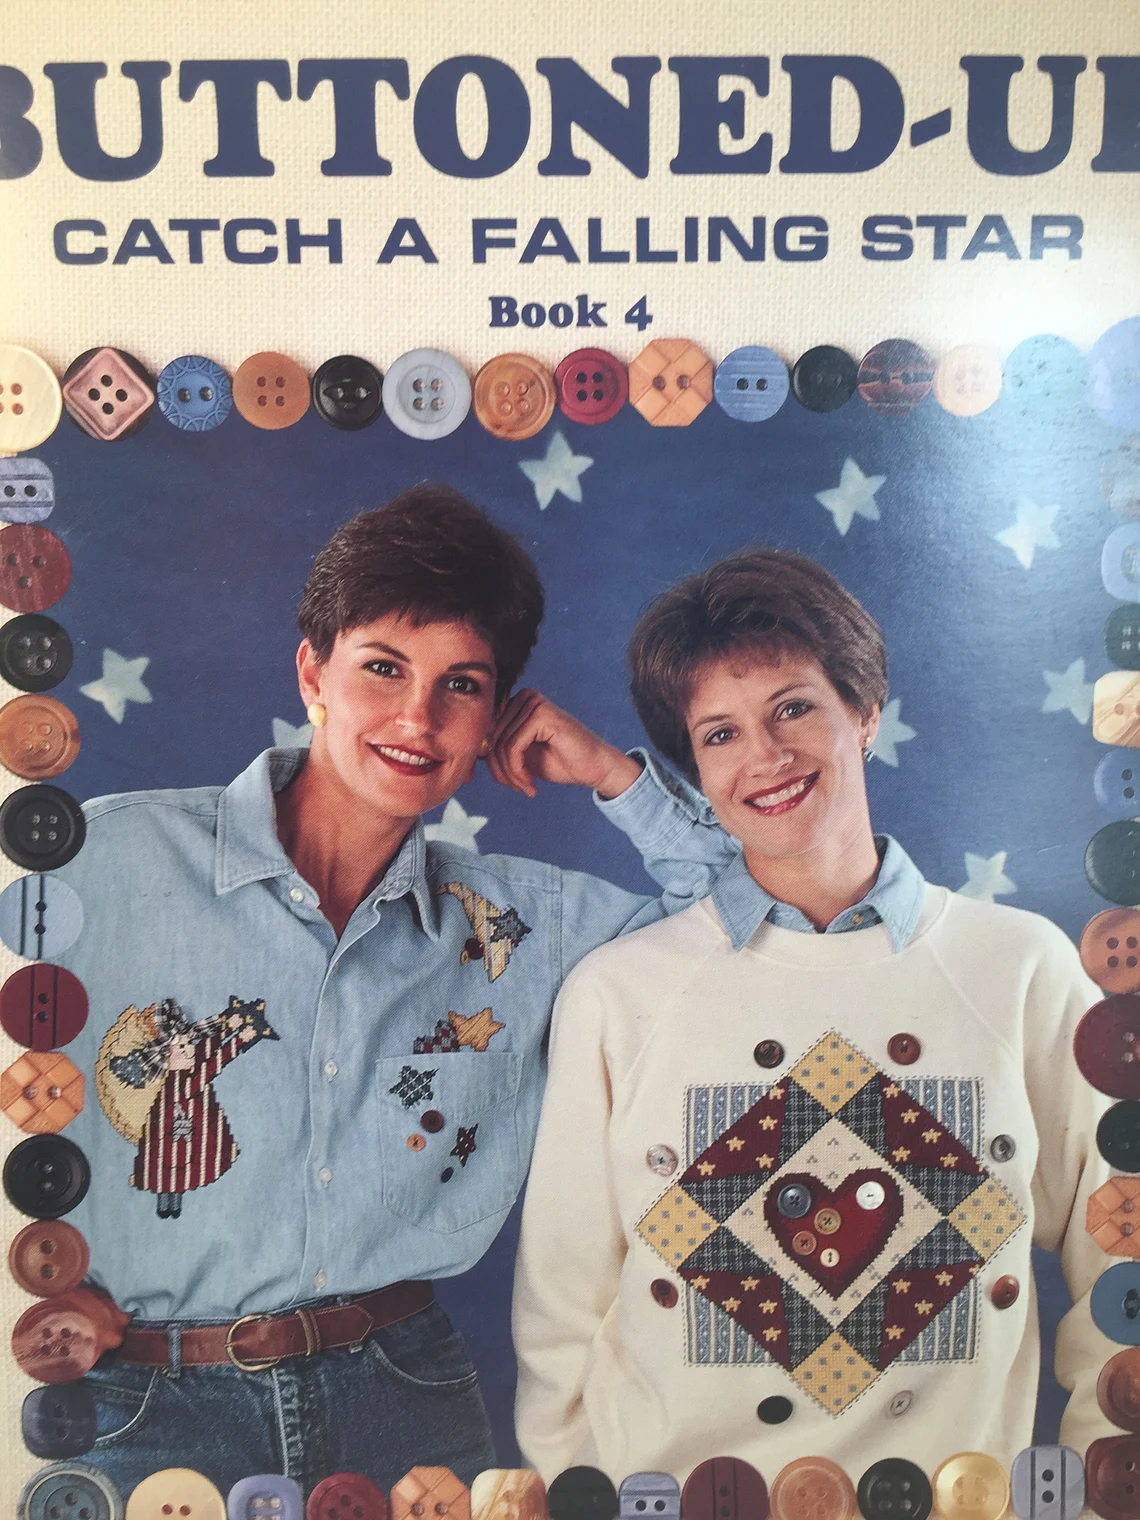 Buttoned-Up/Catch a Falling Star Book 4 (waste canvas)